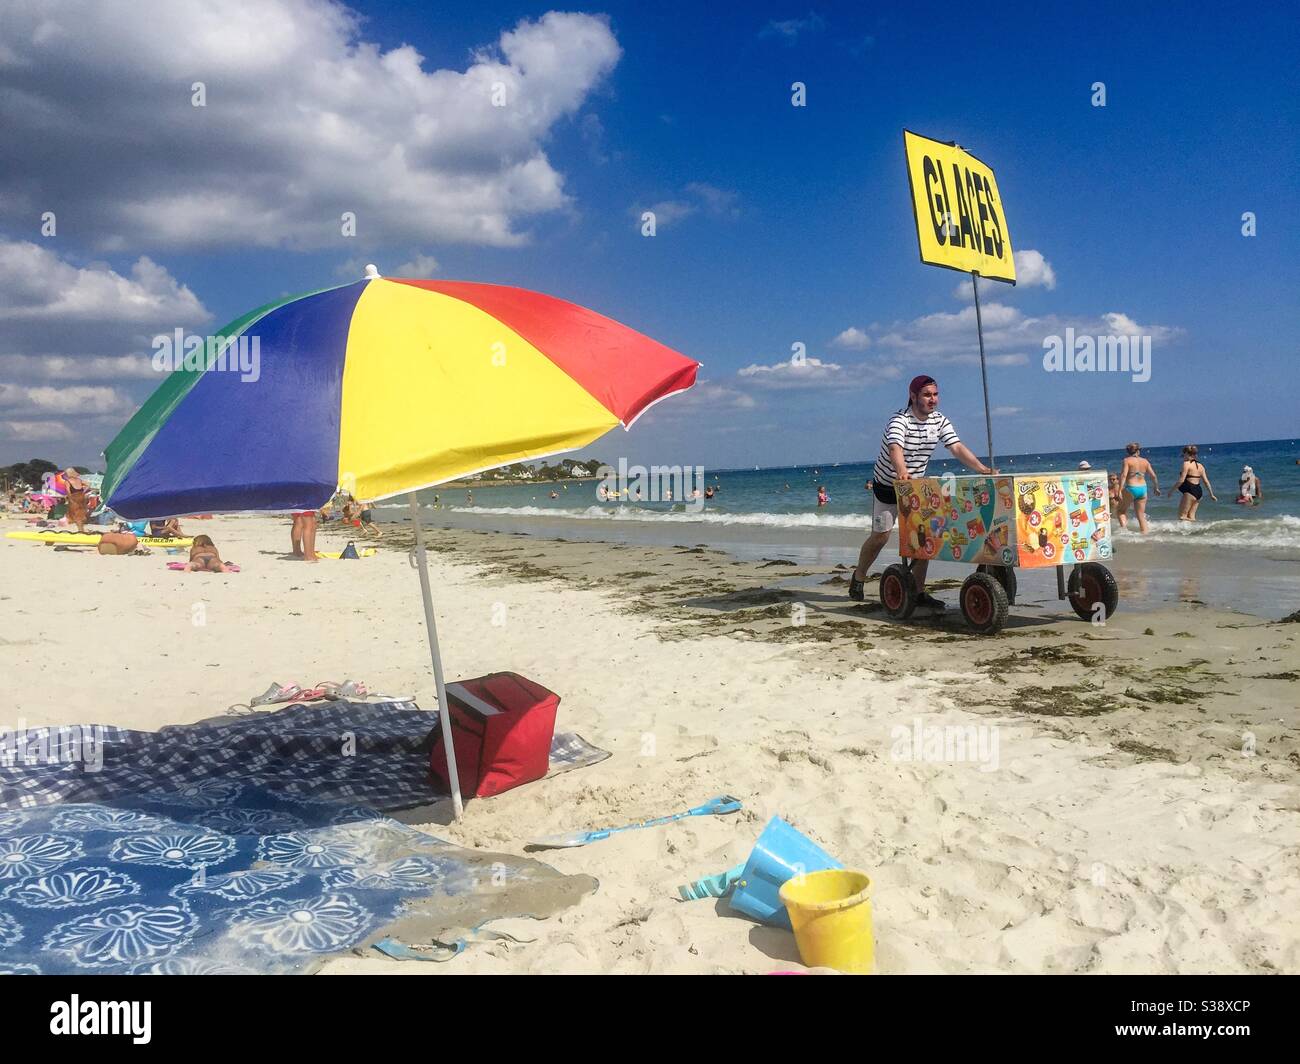 An ice cream seller on the beach in Carnac, Brittany, France Stock Photo